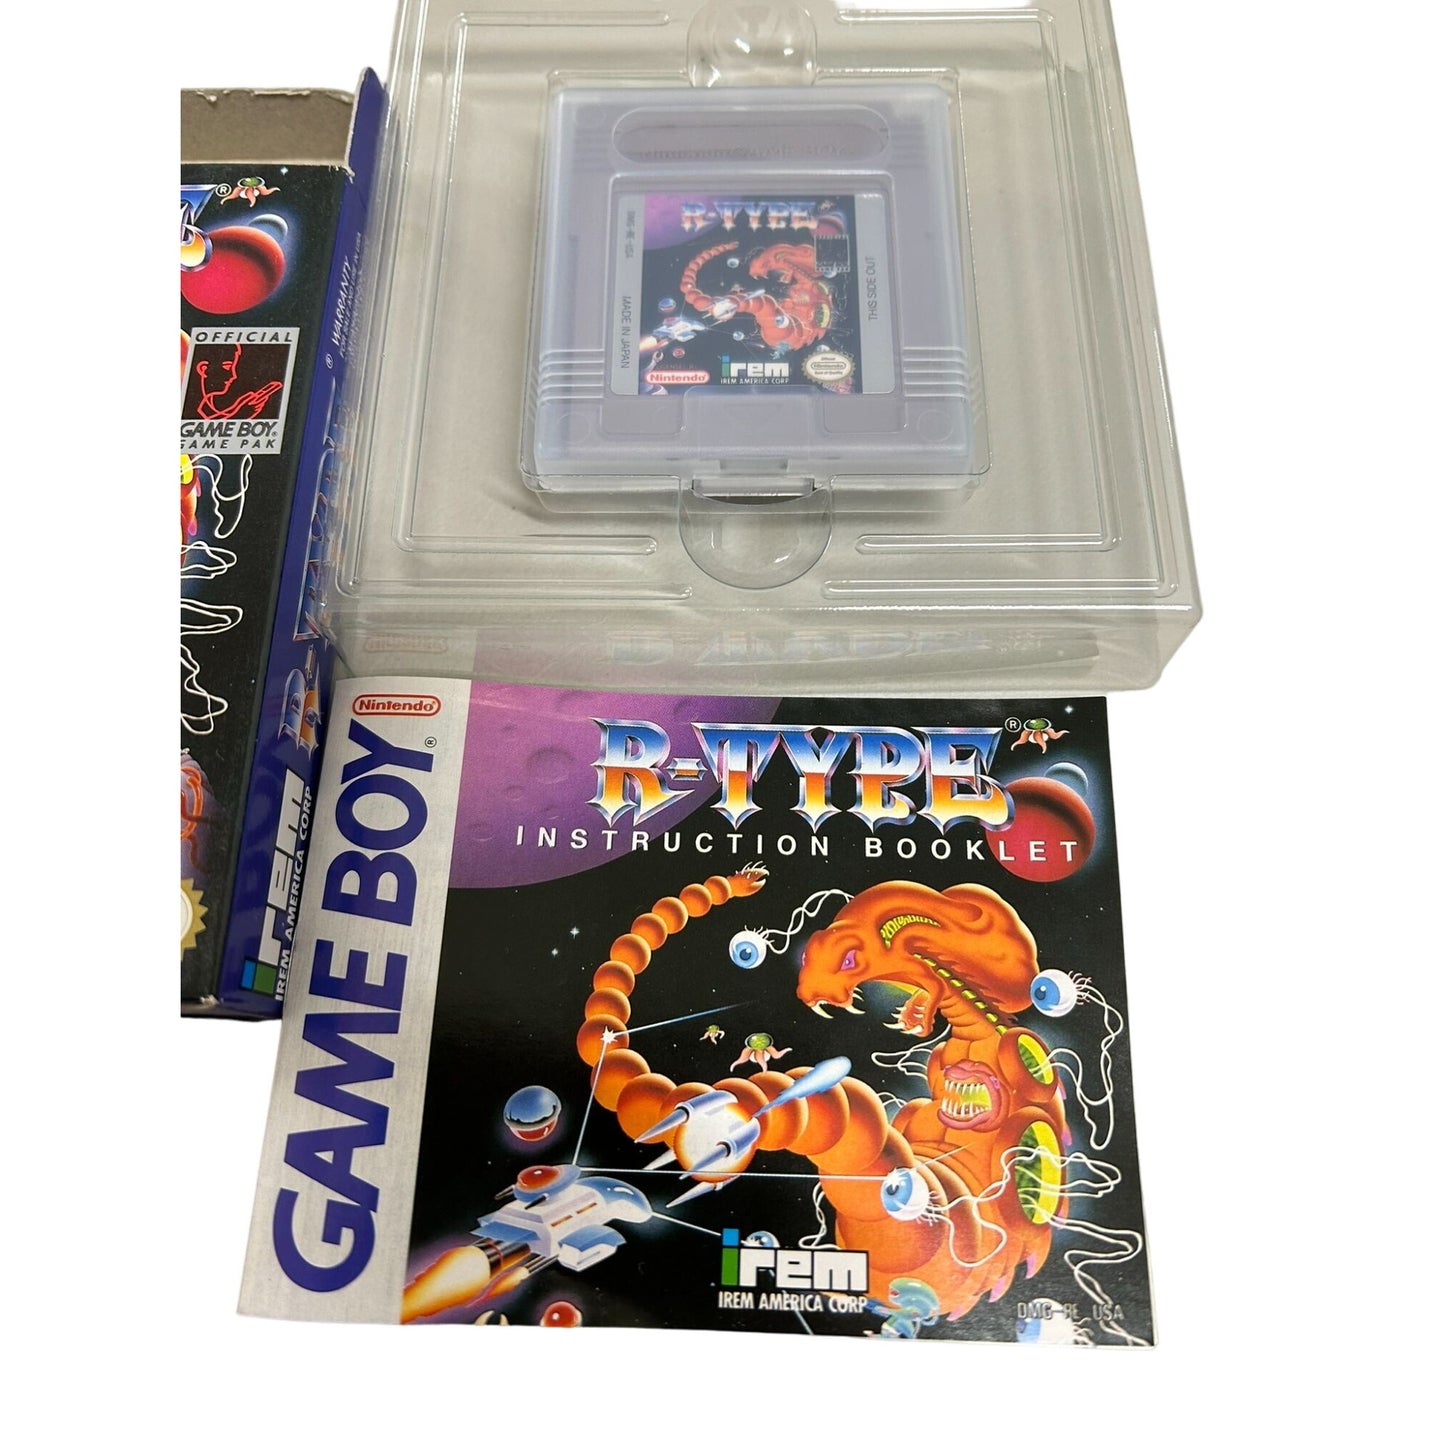 R-Type (Gameboy 1989) Box, Manual and Game GOOD CONDITION!